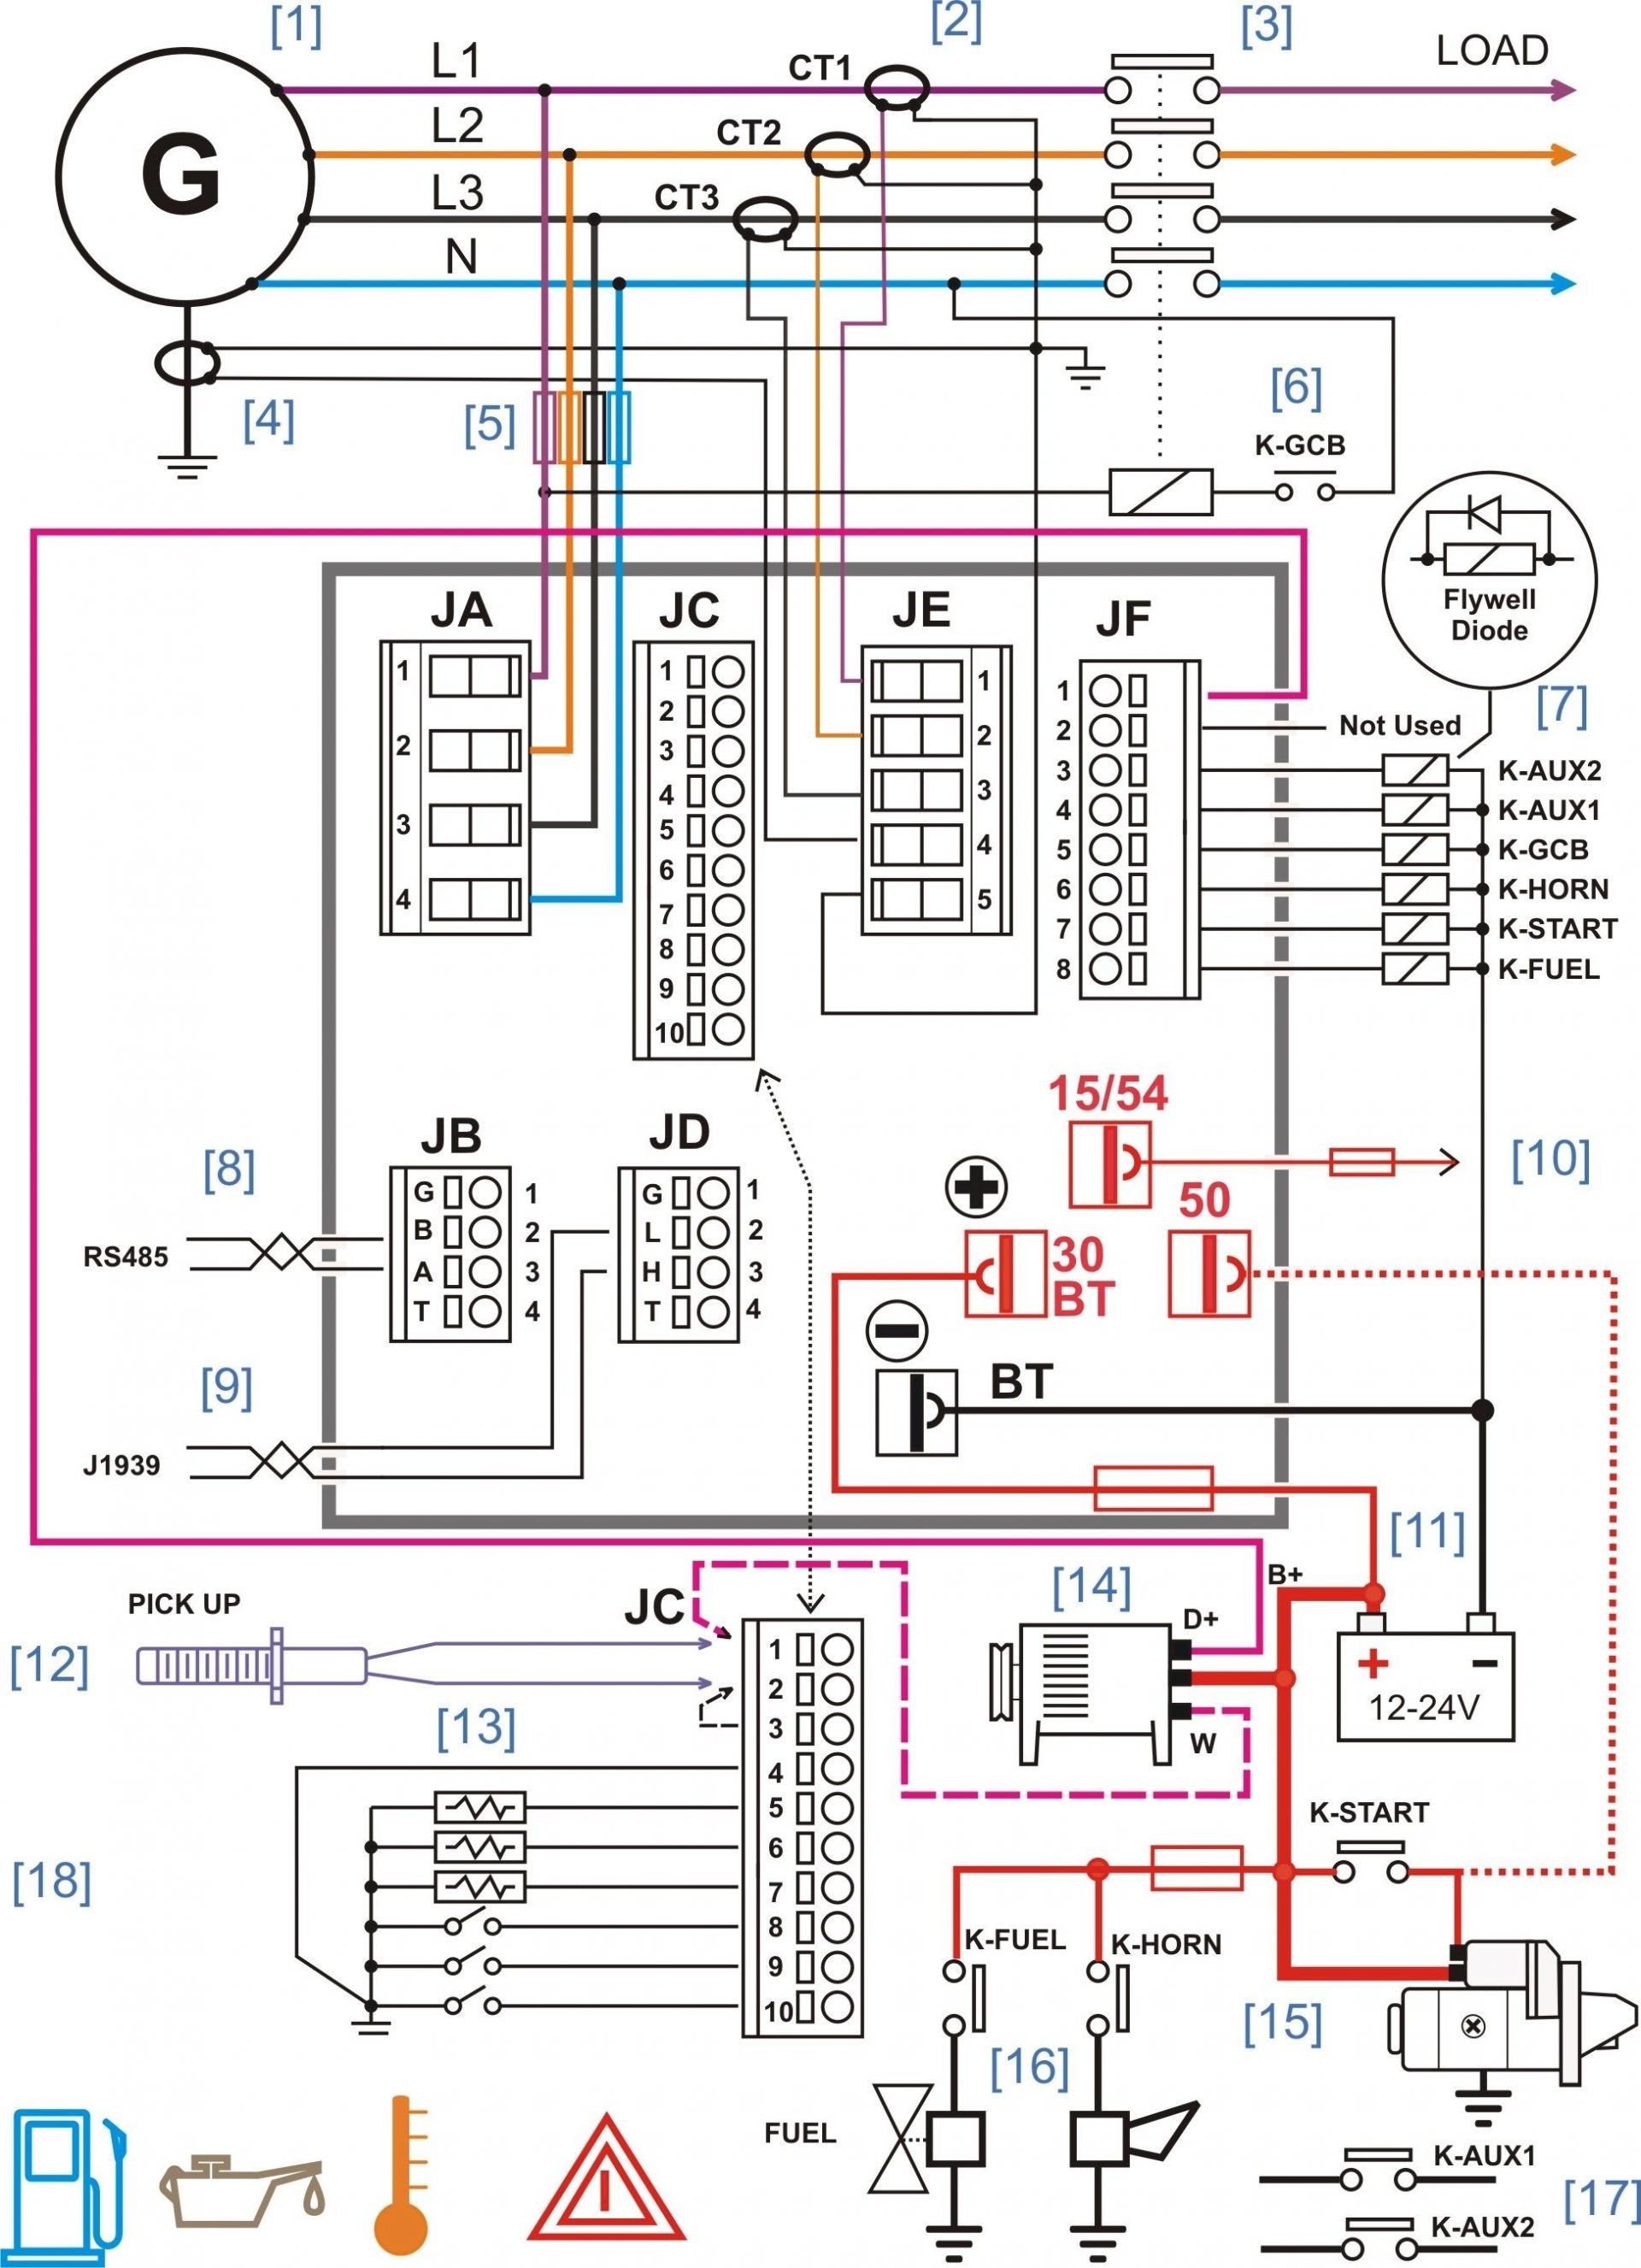 House Electrical Panel Wiring Diagram Rv Distribution Panel Wiring Diagram Sample Of House Electrical Panel Wiring Diagram